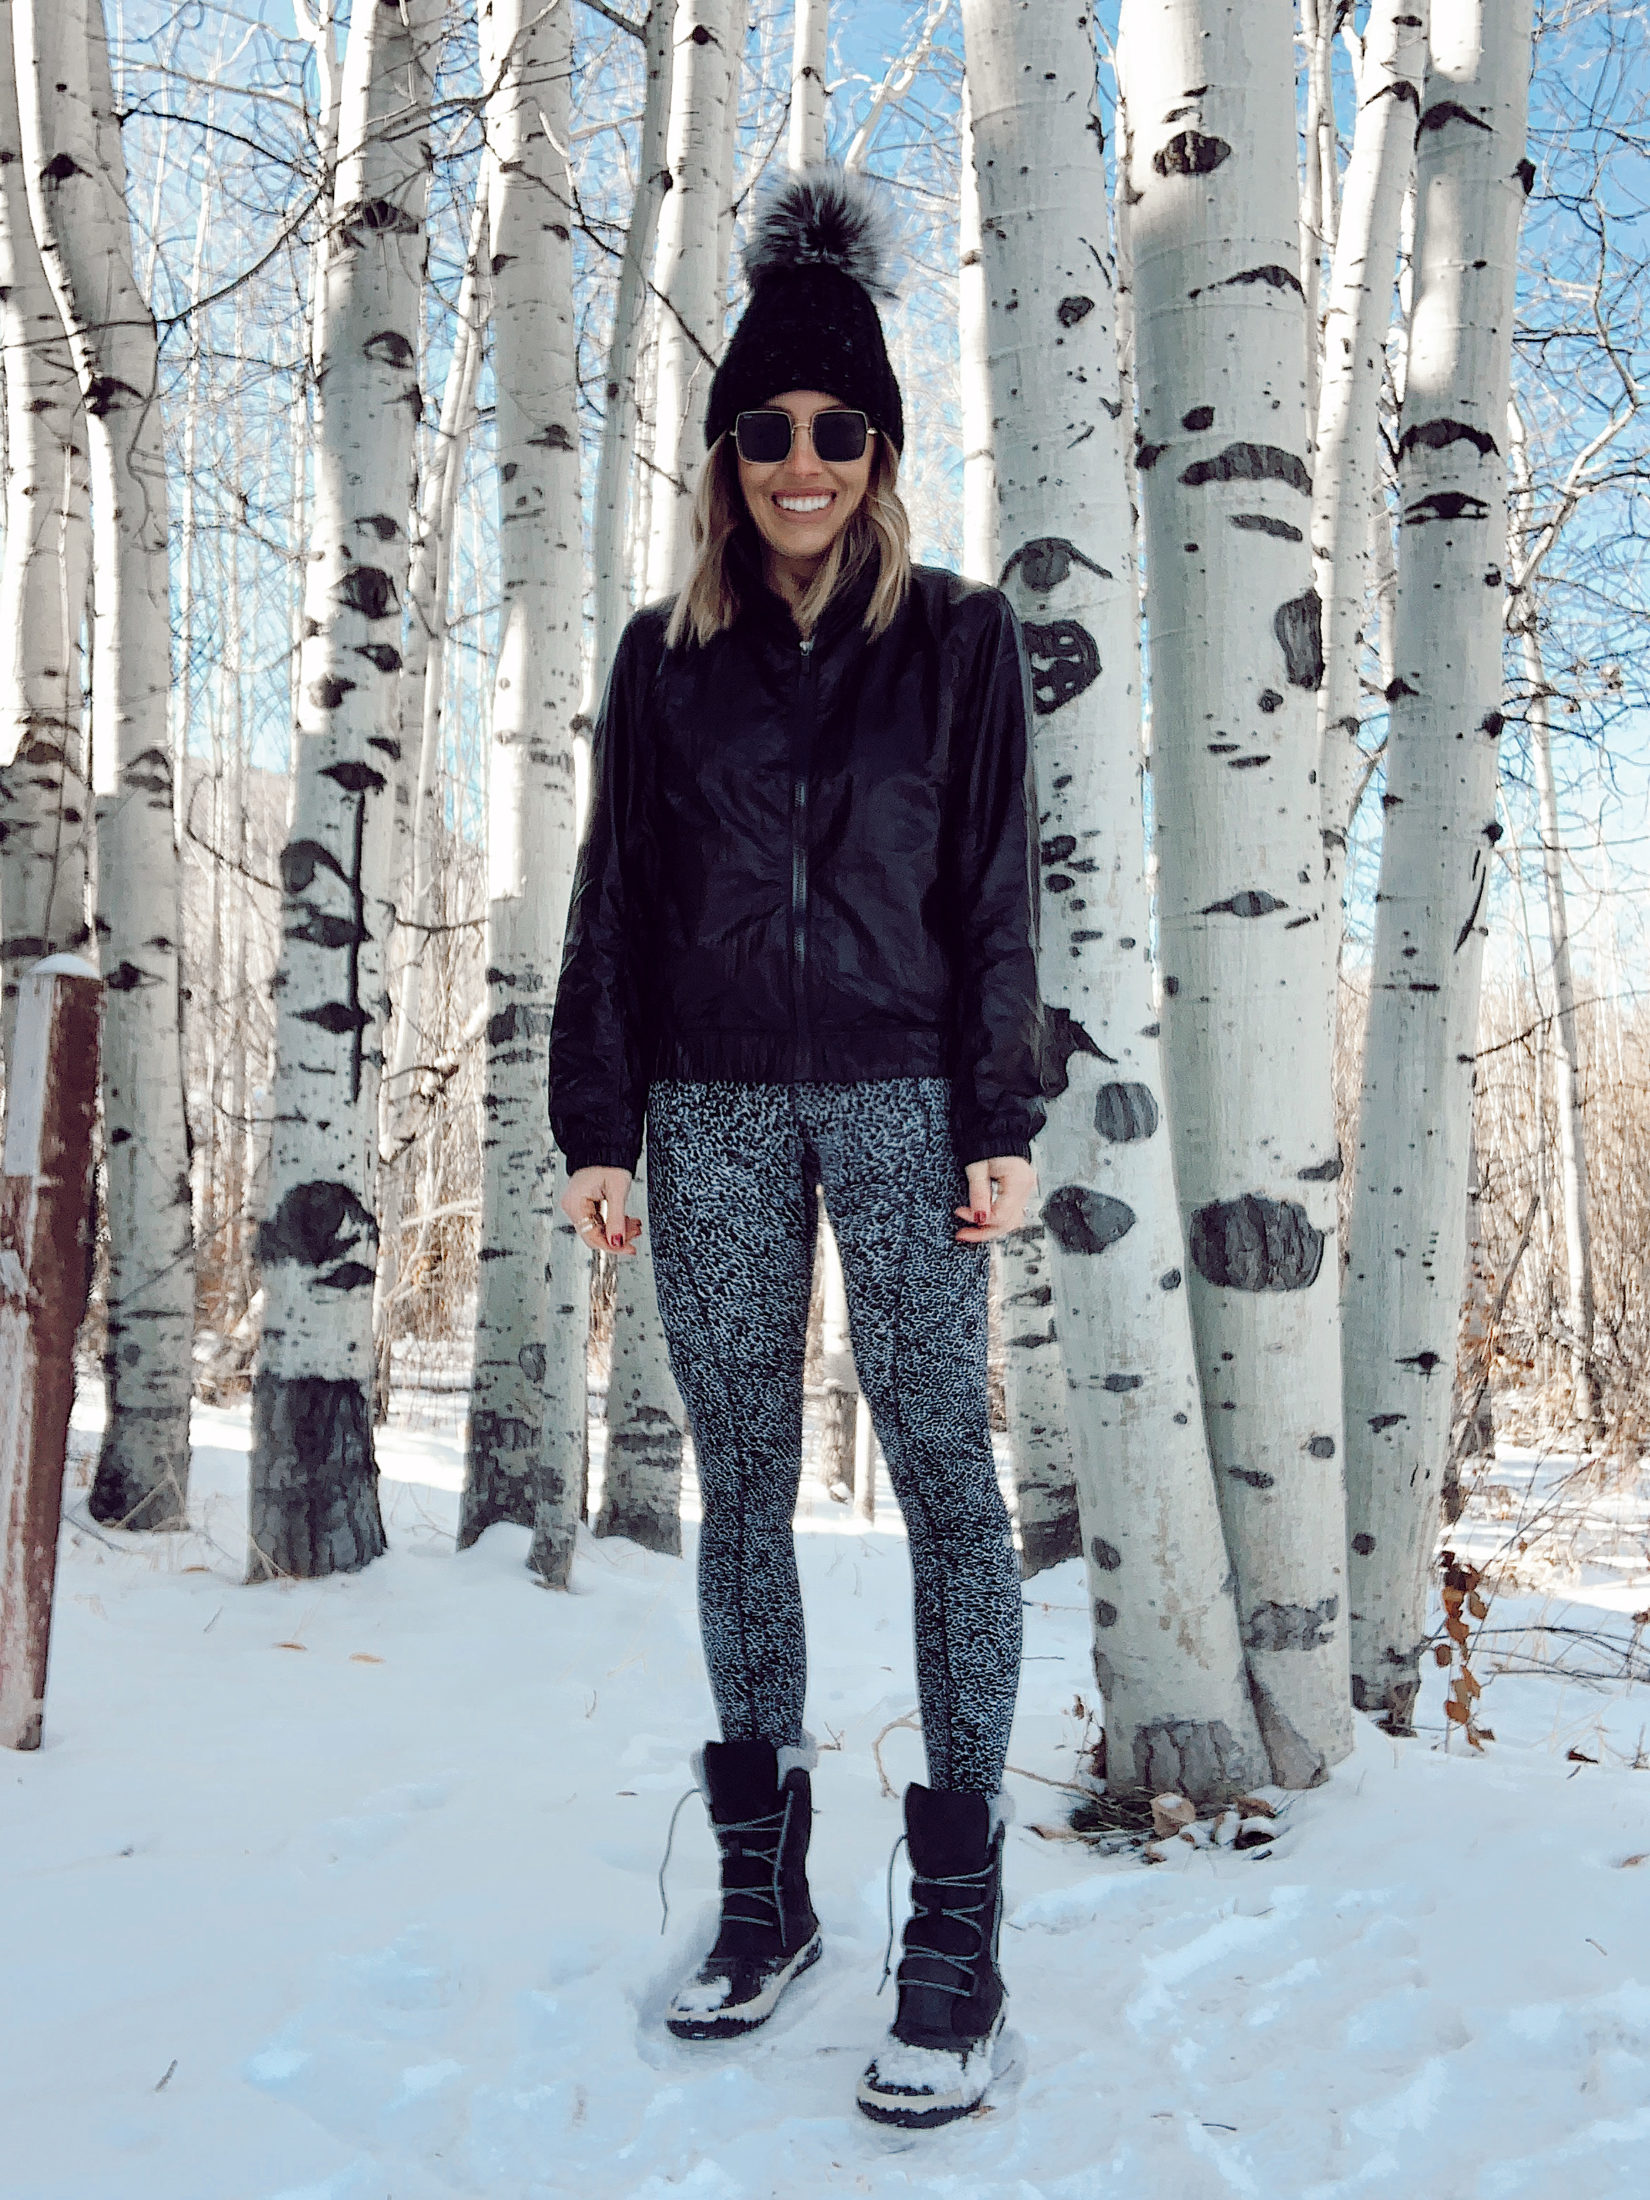 Current lululemon Favorites & Gifts for Her On Sale - The Real